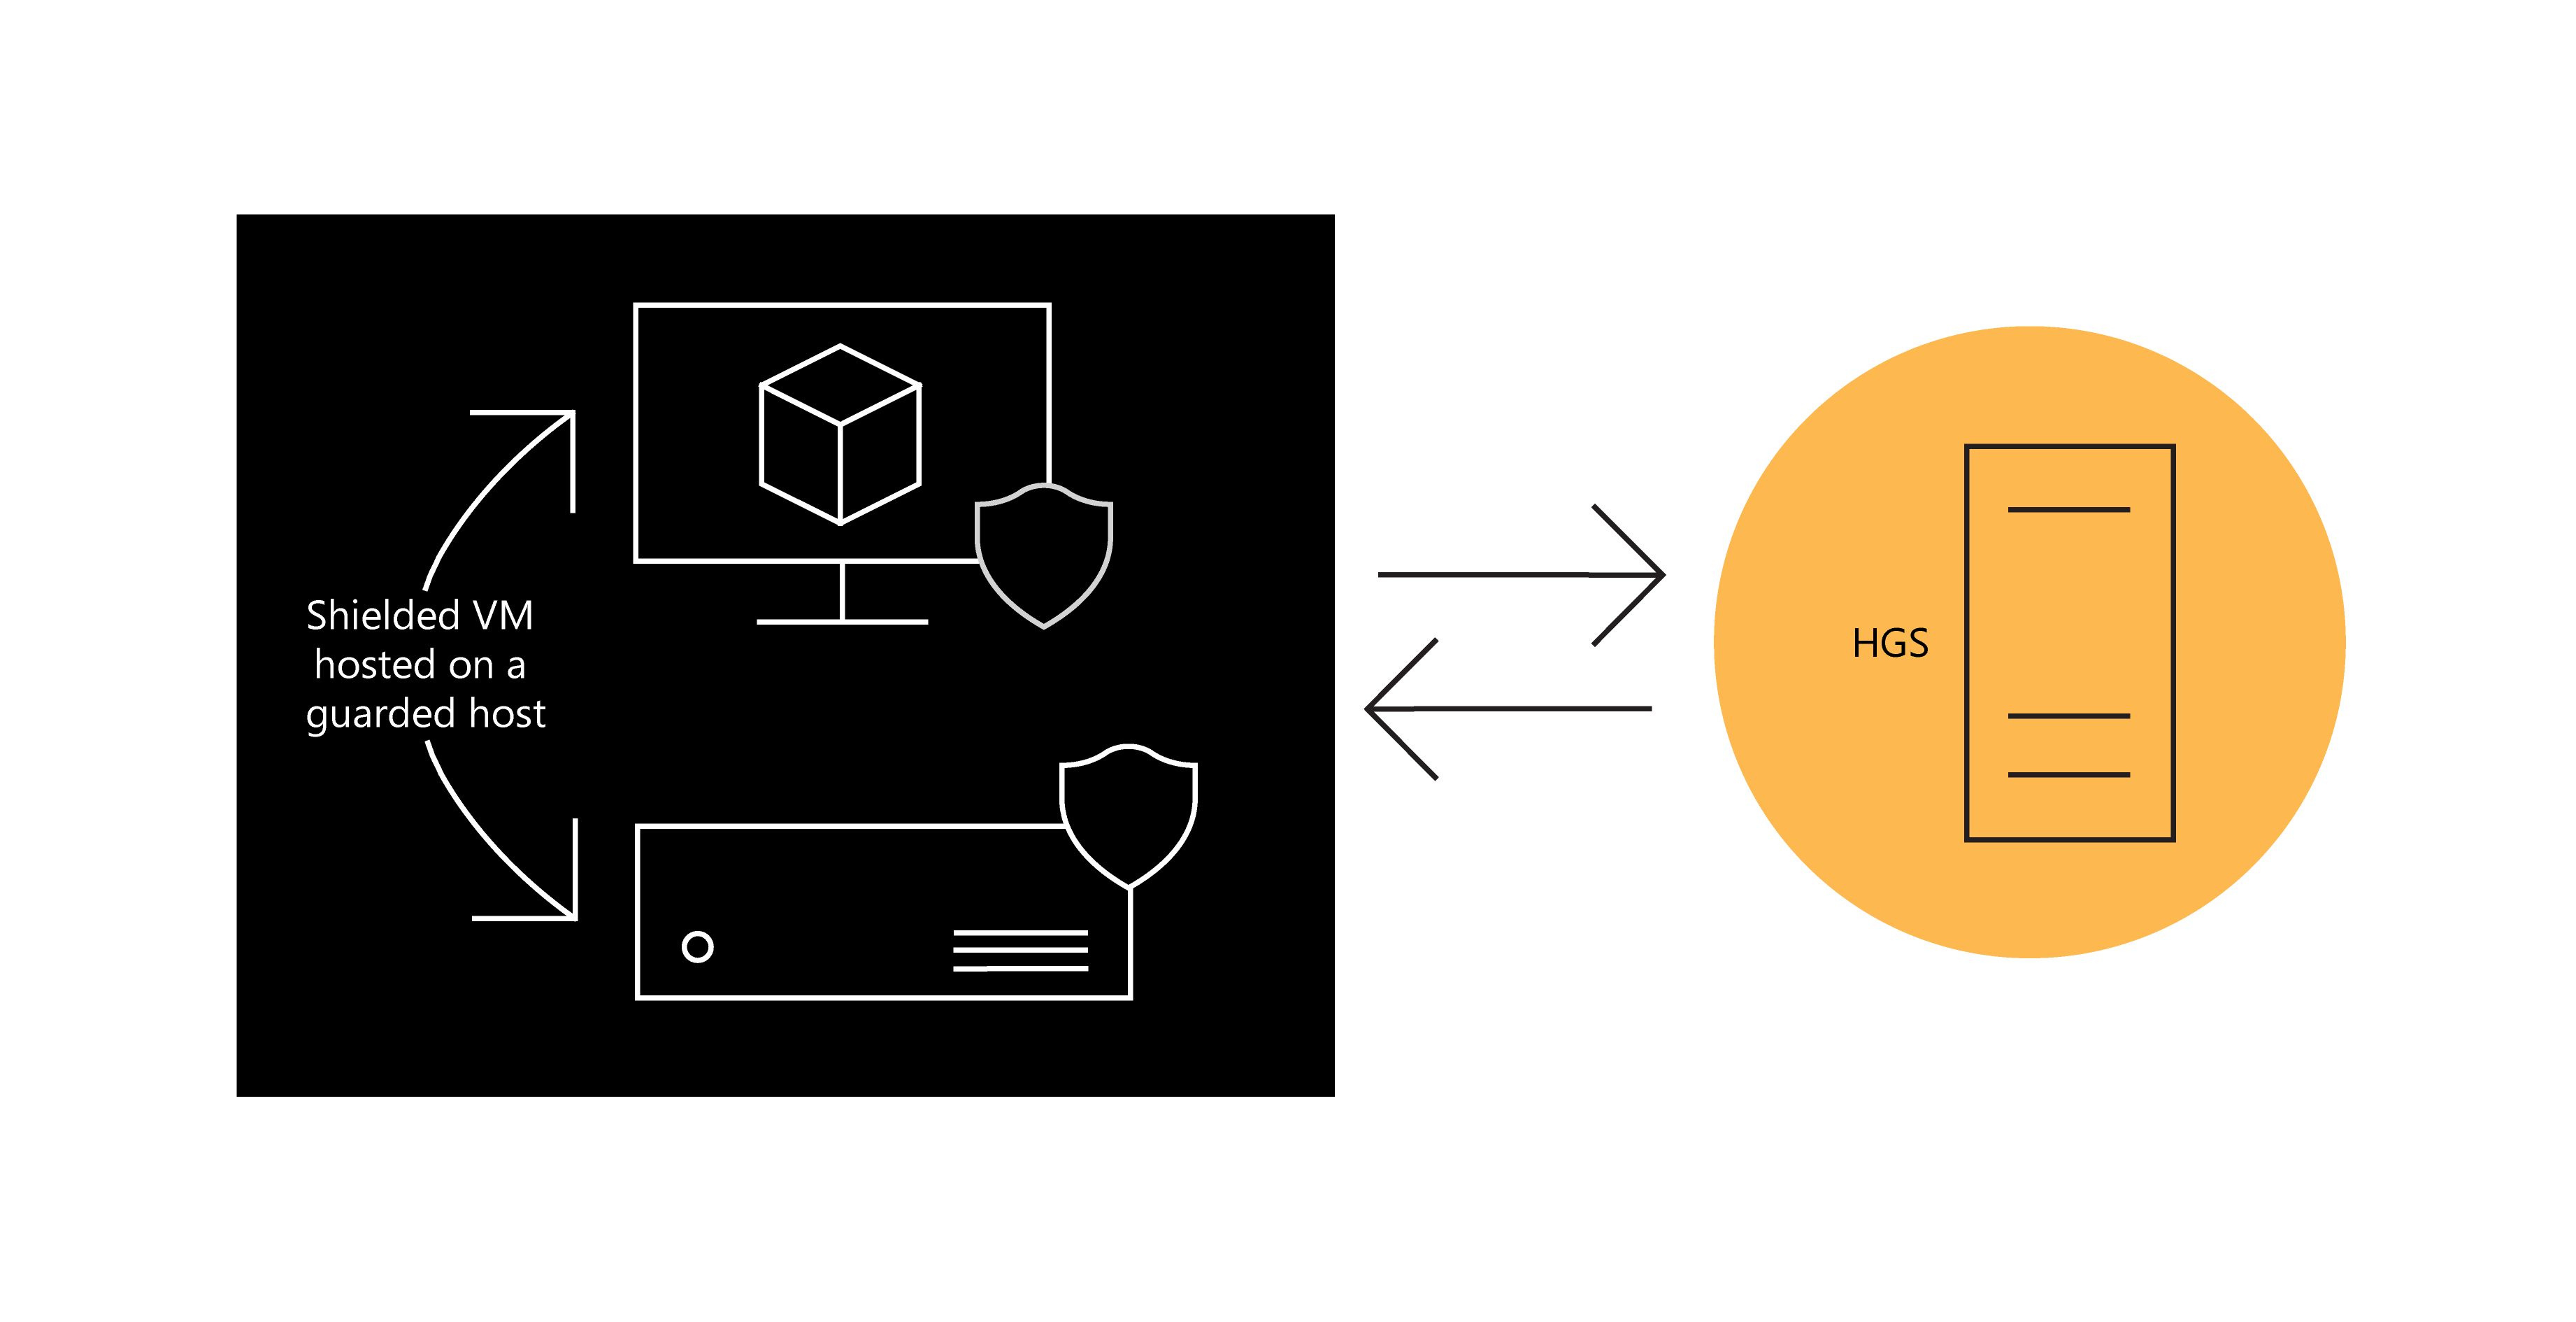 Diagram of a guarded host with a hosted shielded virtual machine. The guarded host is attesting that it is approved to run as a Hyper-V host and then requests keys from the HGS server, all of which take place in a guarded fabric.